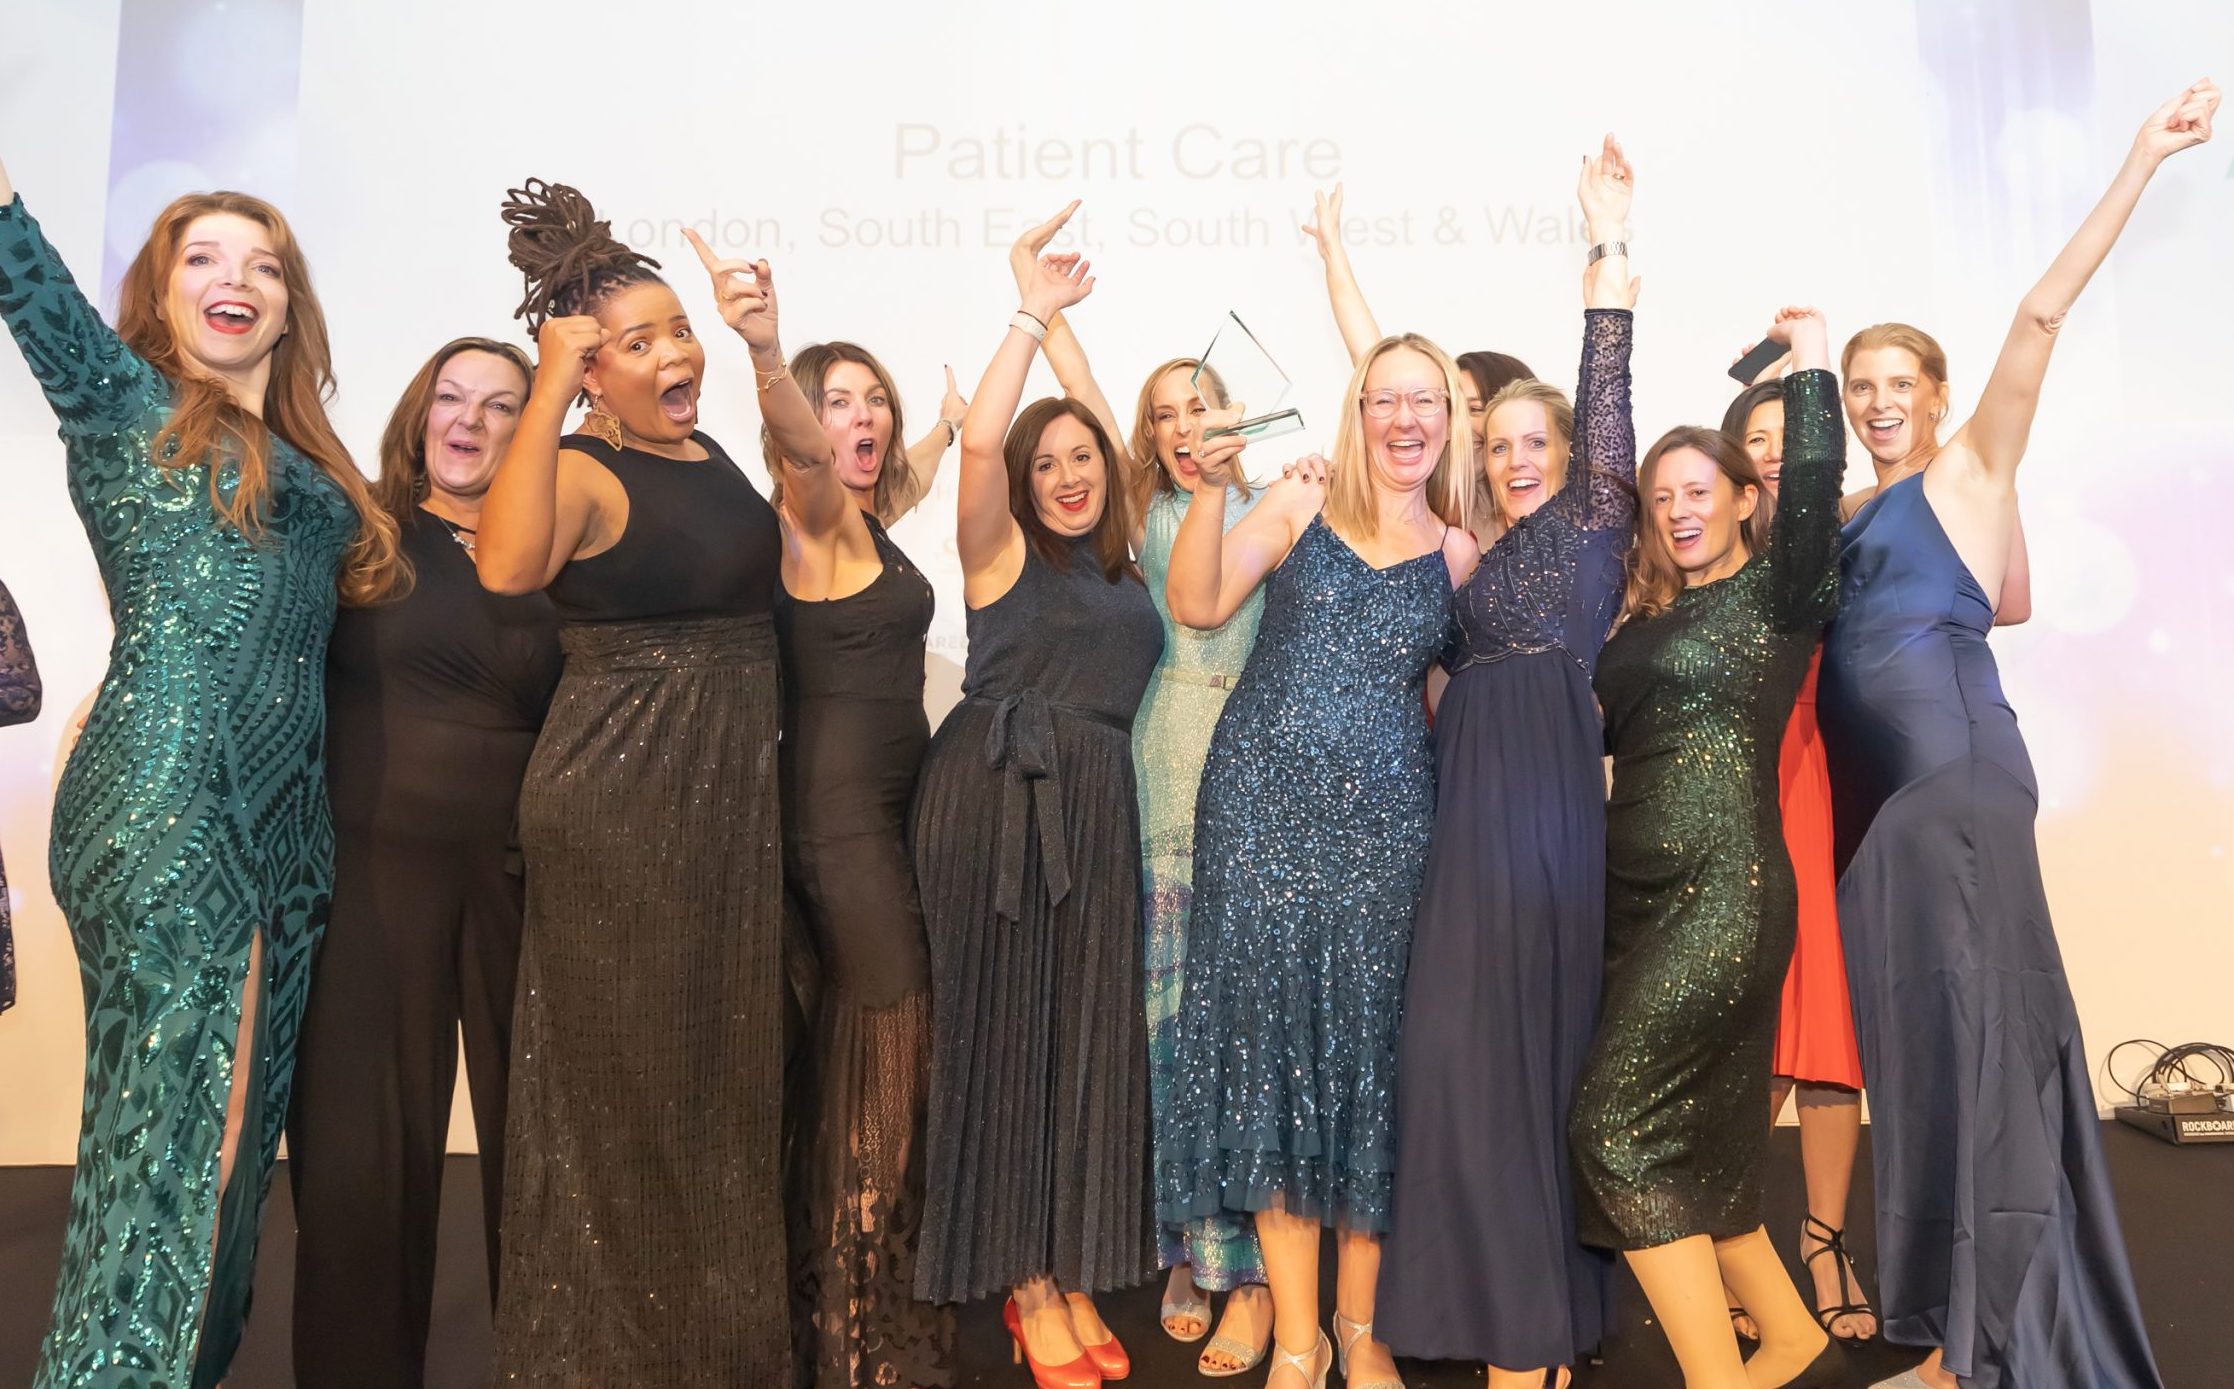 Private Dentistry Best Patient Care Award